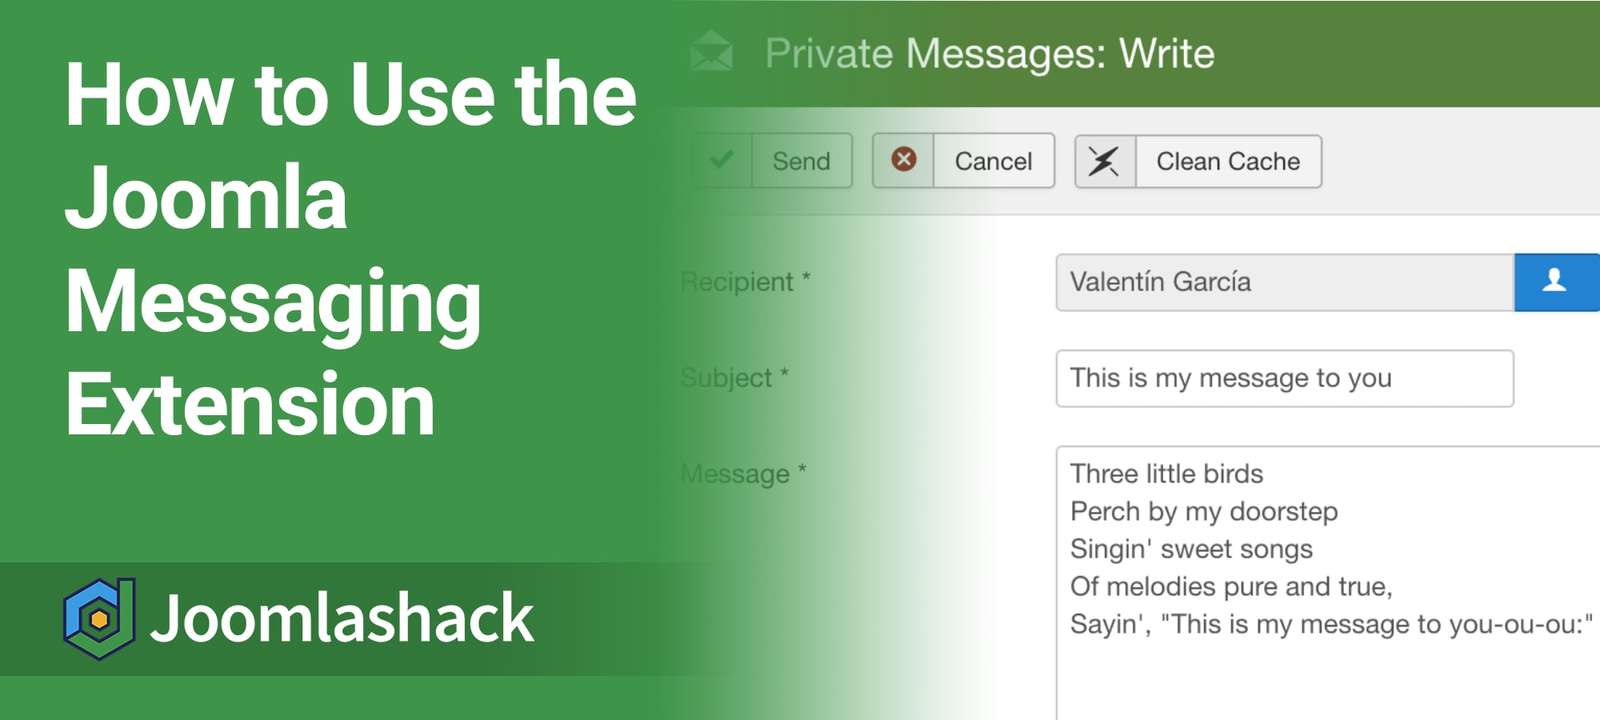 How to Use the Joomla Messaging Extension